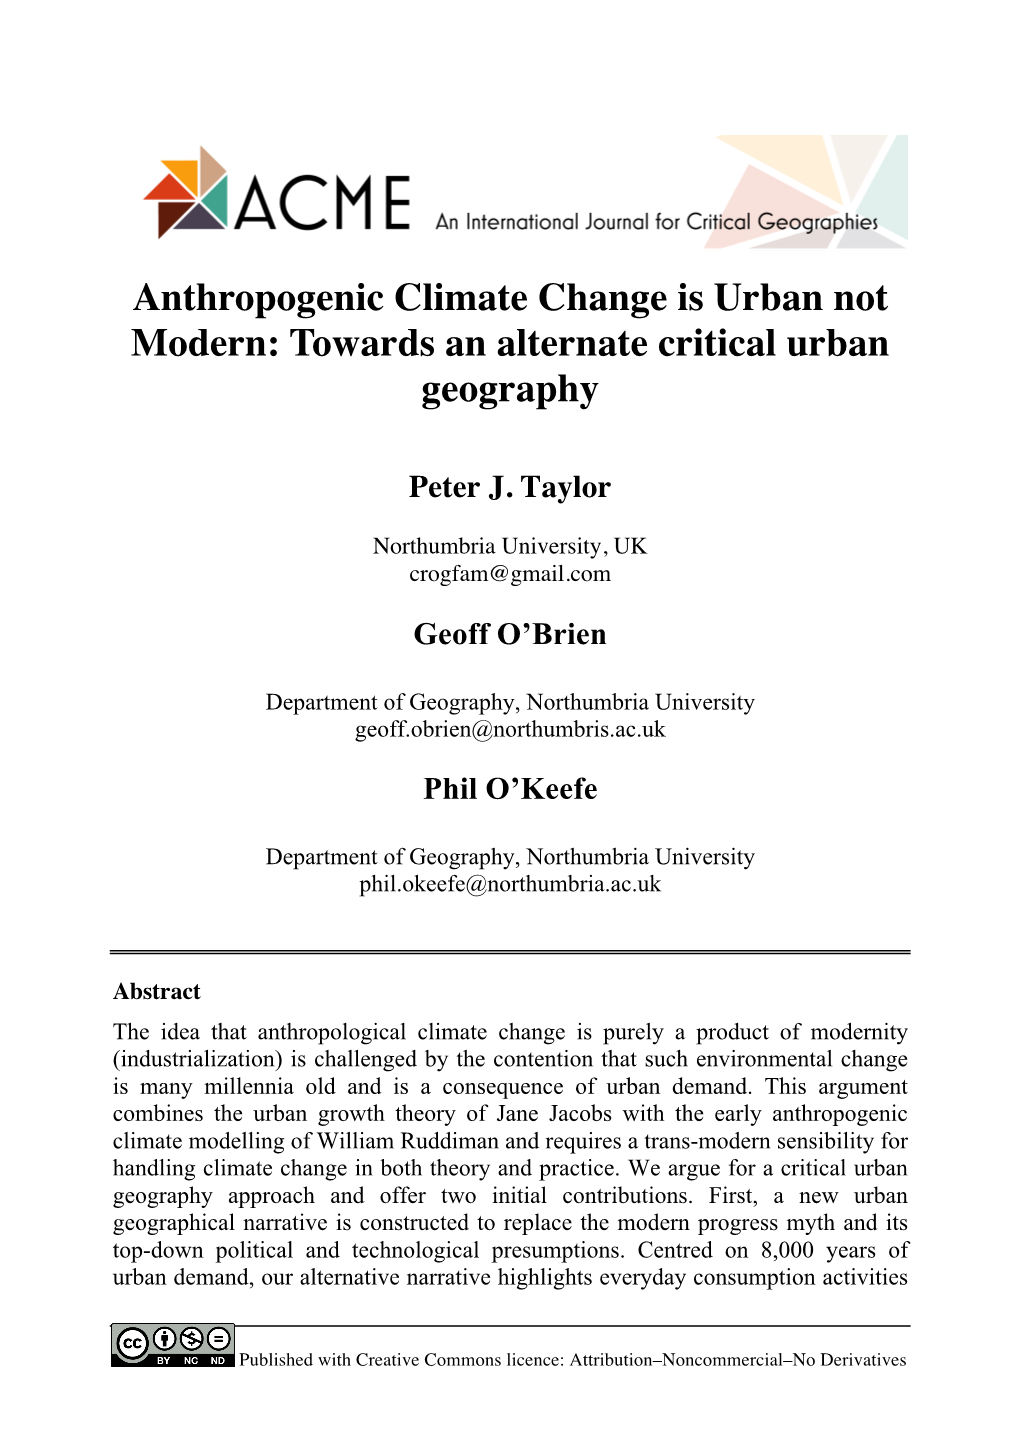 Anthropogenic Climate Change Is Urban Not Modern: Towards an Alternate Critical Urban Geography